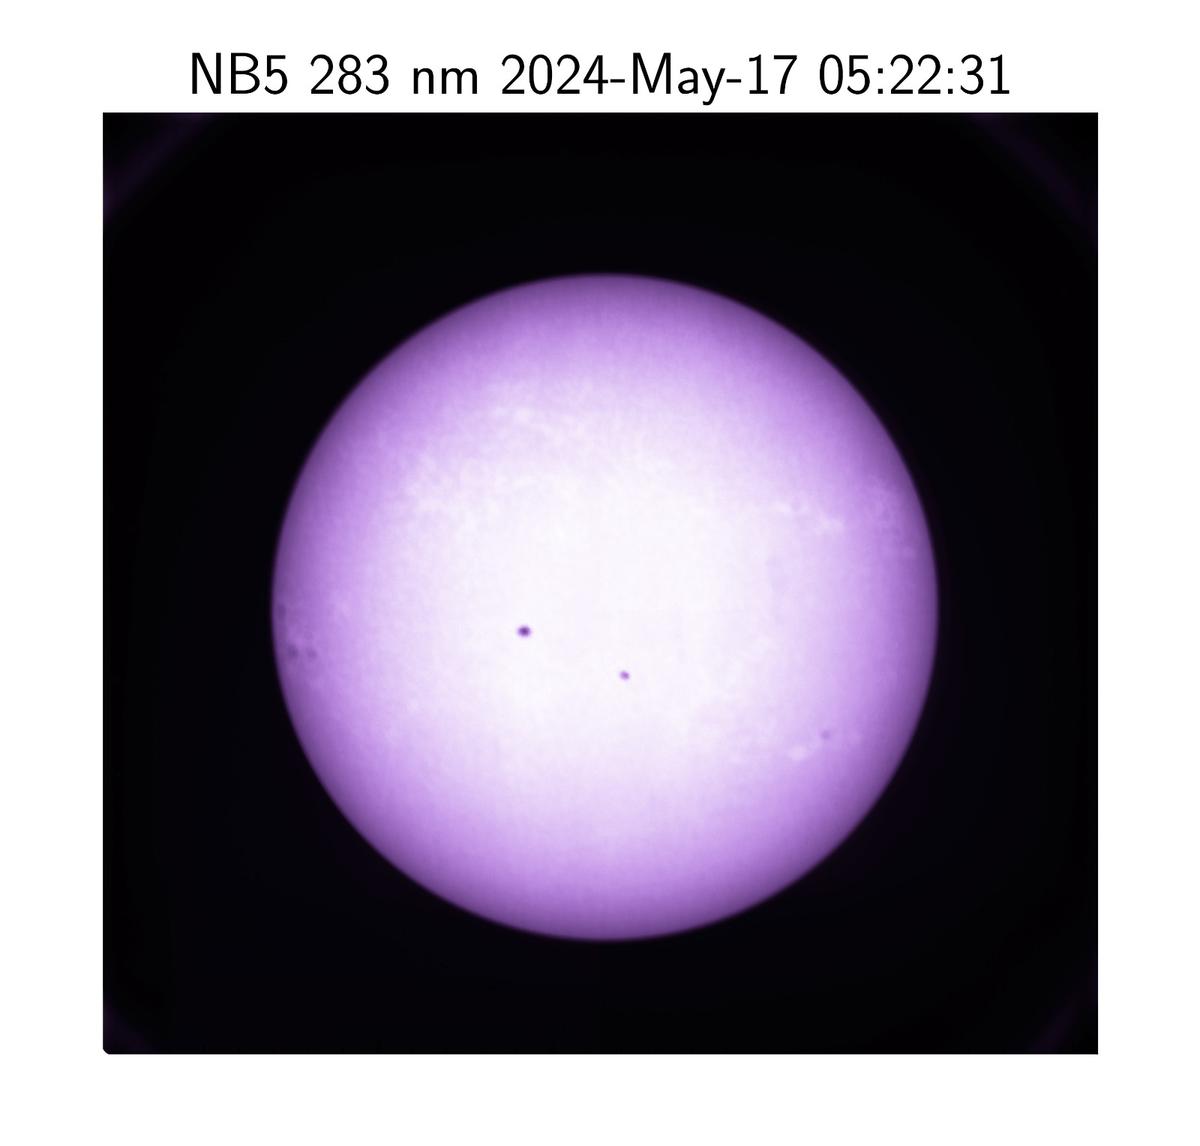 An image captured by SUIT and VELC instruments (Aditya-L1 mission) shows dynamic activities of the Sun during May 2024.